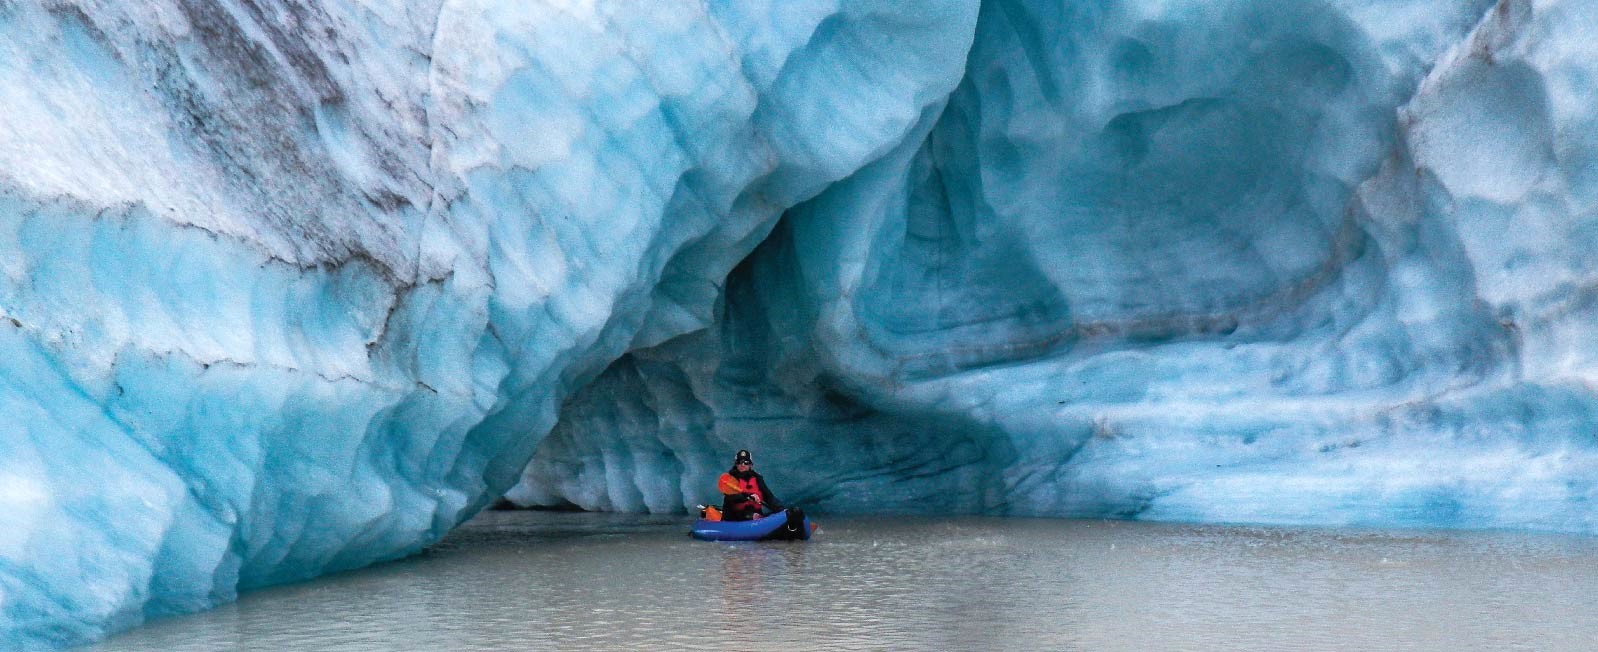 Kayaker emerges from an enormous iceberg